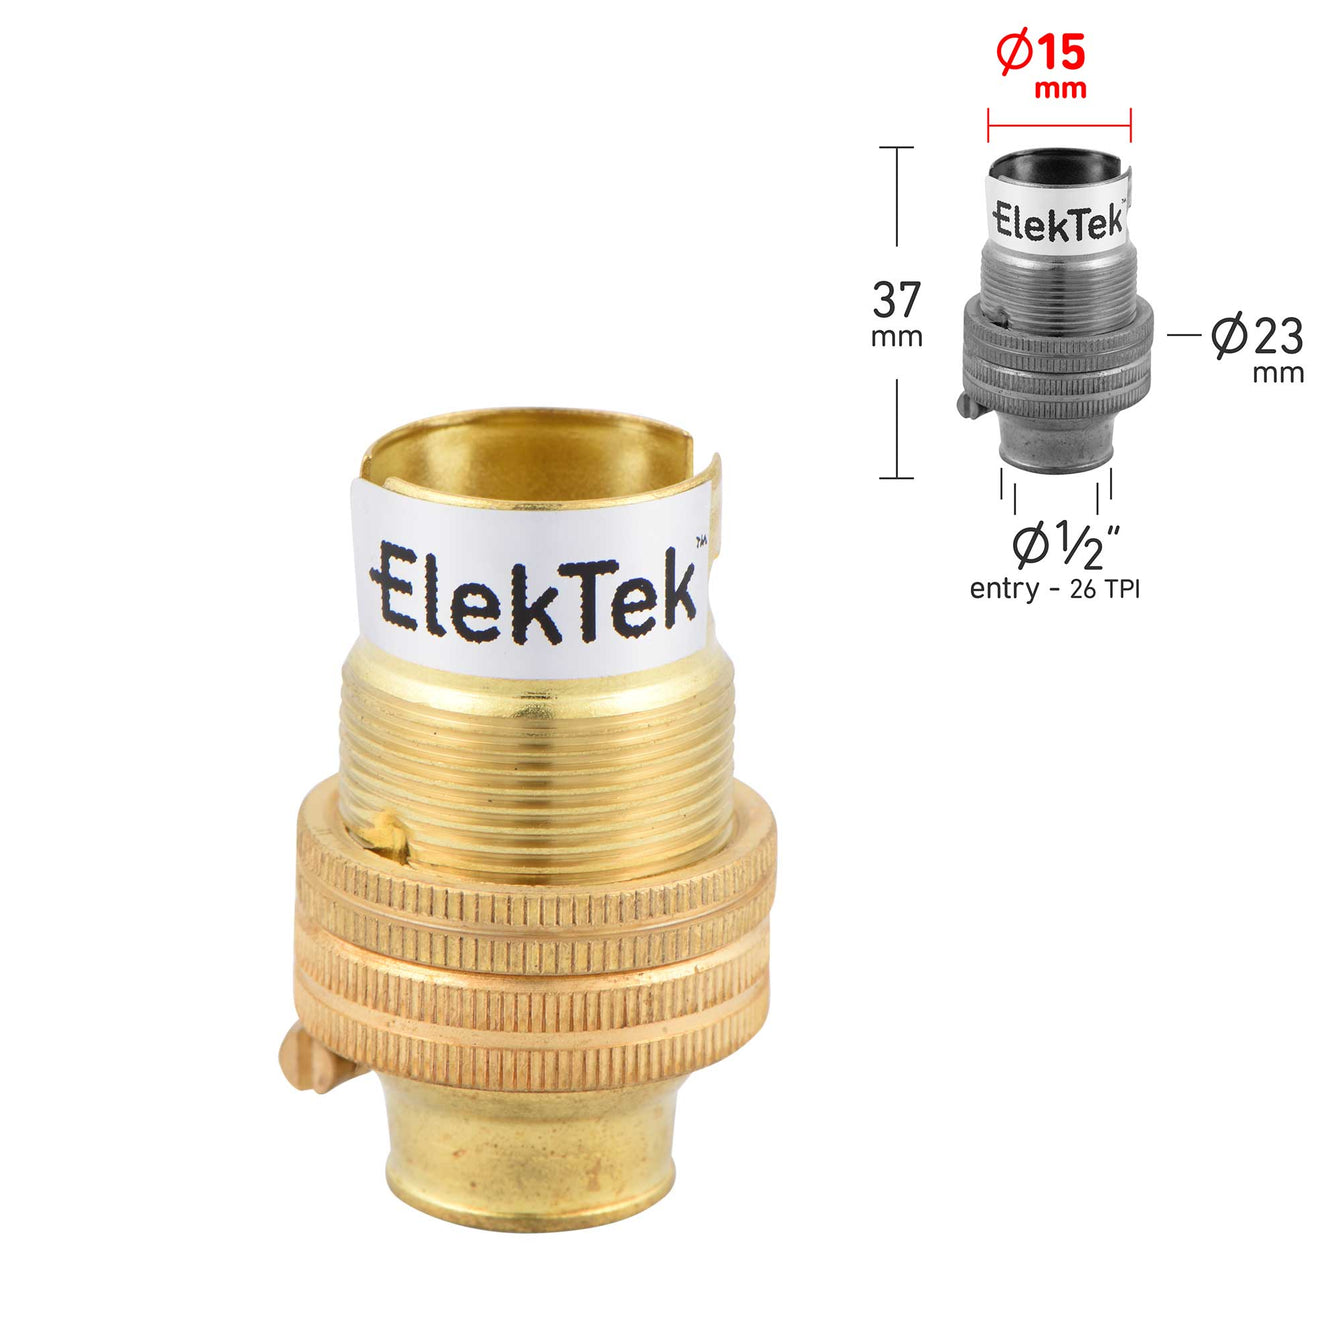 ElekTek Lamp Holder 10mm or Half Inch Entry Miniature Small Bayonet Cap SBC B15 With Shade Ring Solid Brass - Buy It Better Chrome / Half Inch